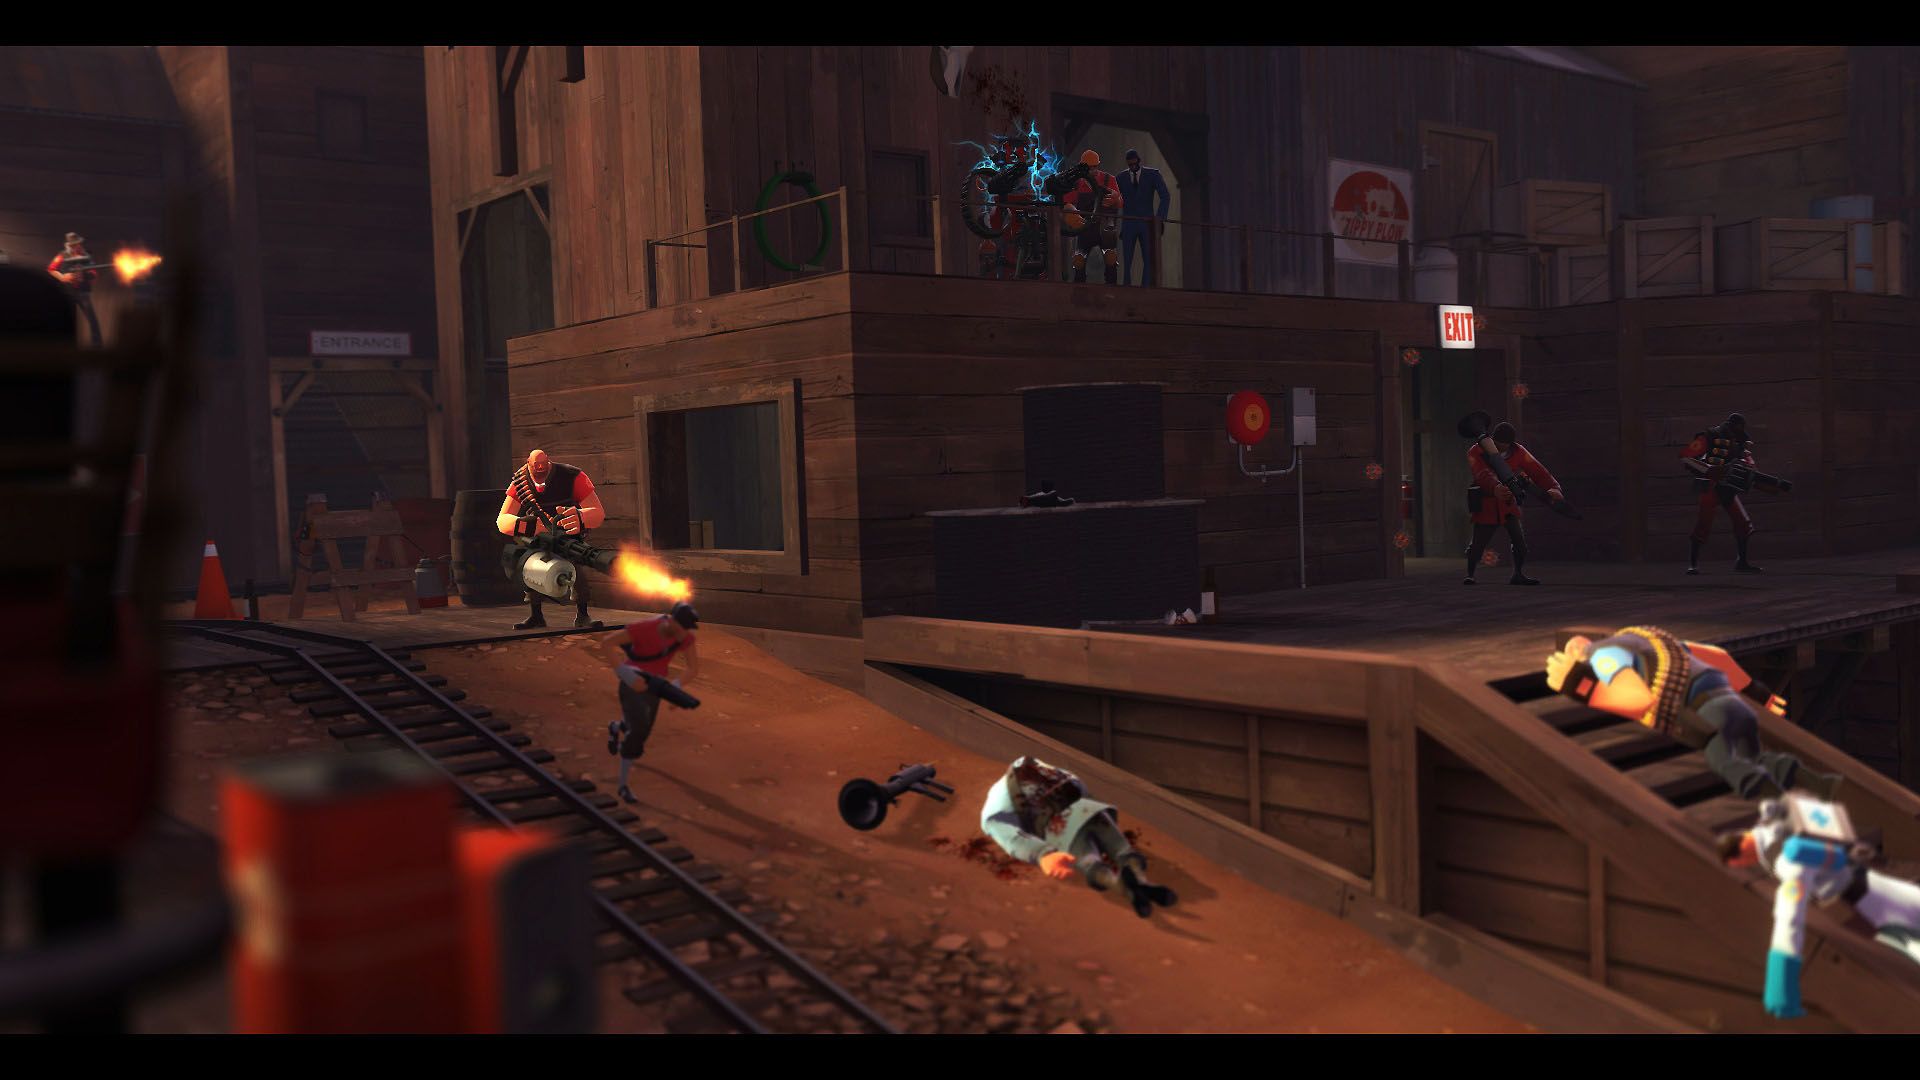 Team Fortress 2 Wallpaper - Pc Game , HD Wallpaper & Backgrounds